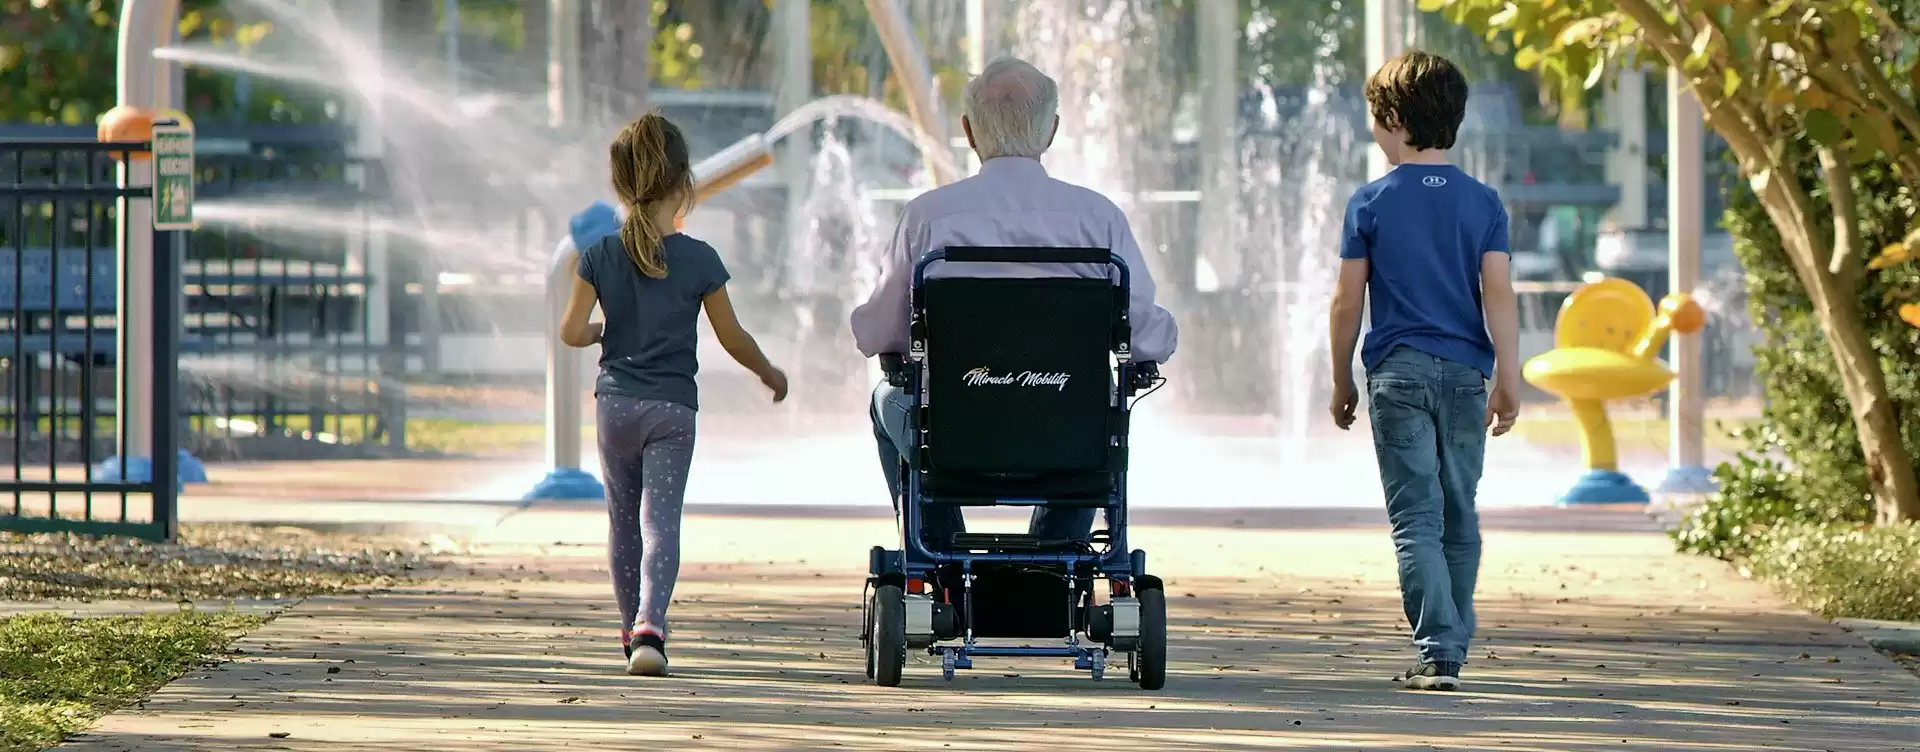 A man in an electric wheelchair and two children walking down a path.